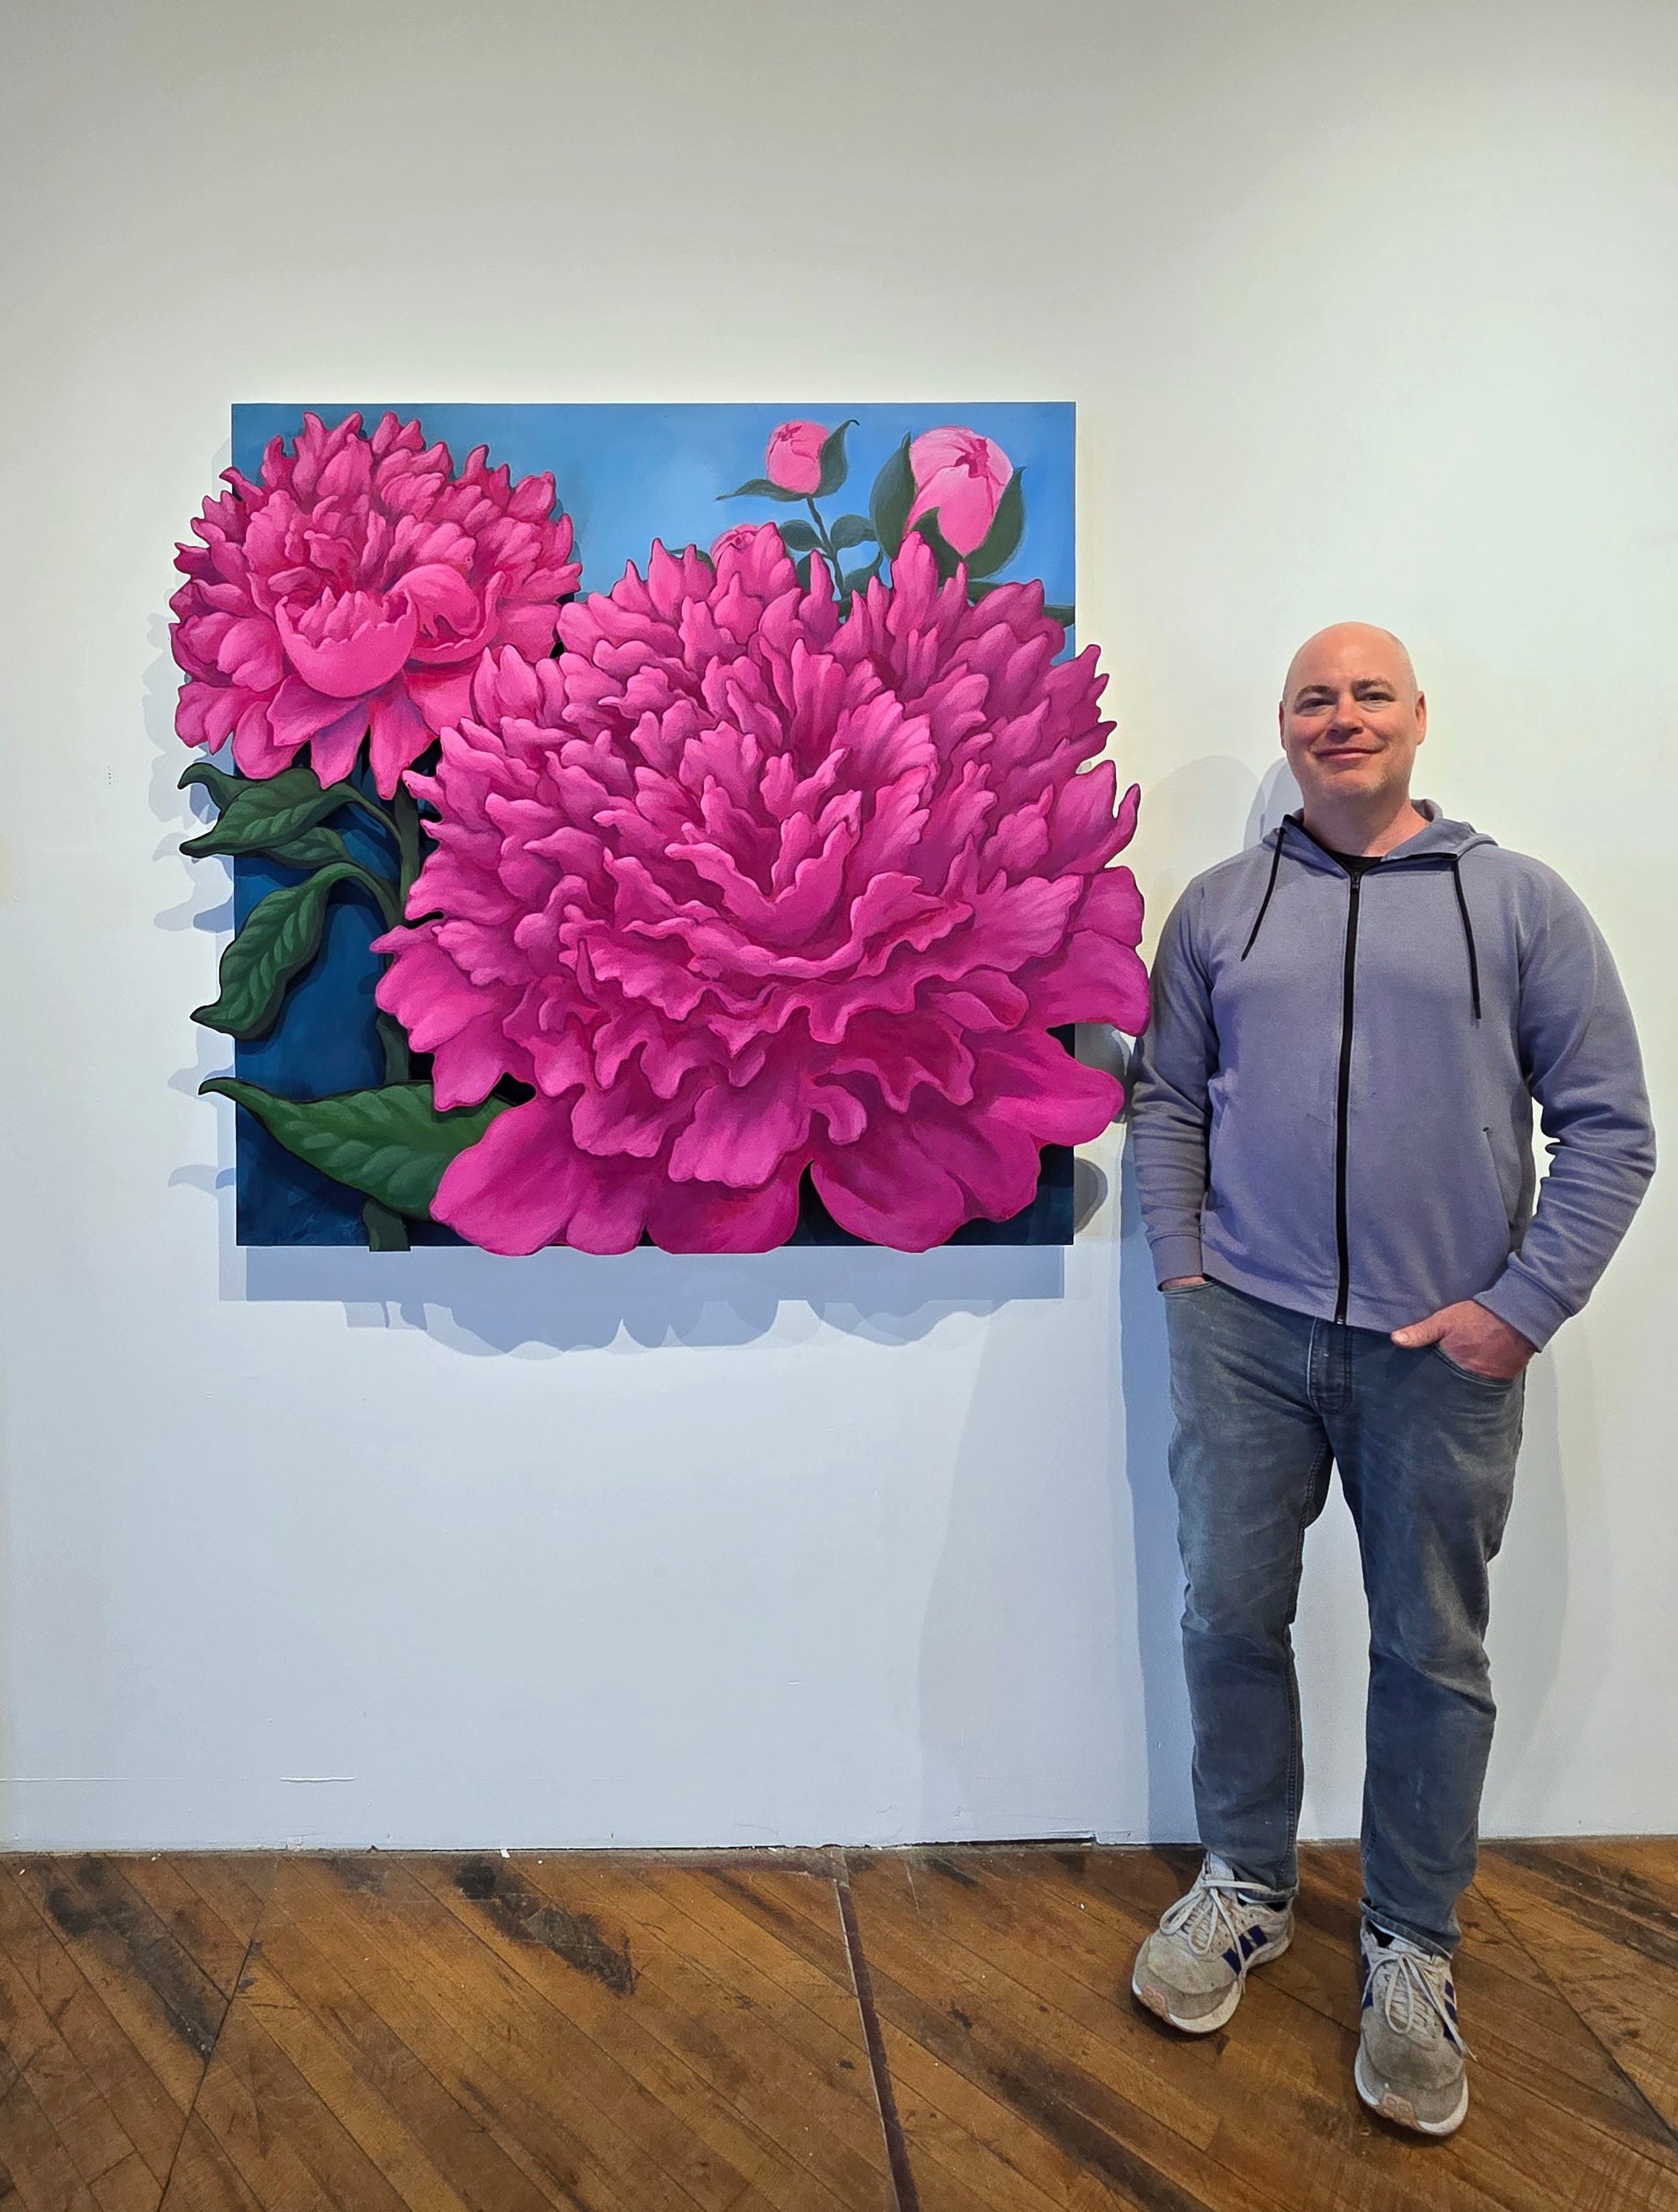 Peonies - 3 Dimensional Original Painting   AVAILABLE